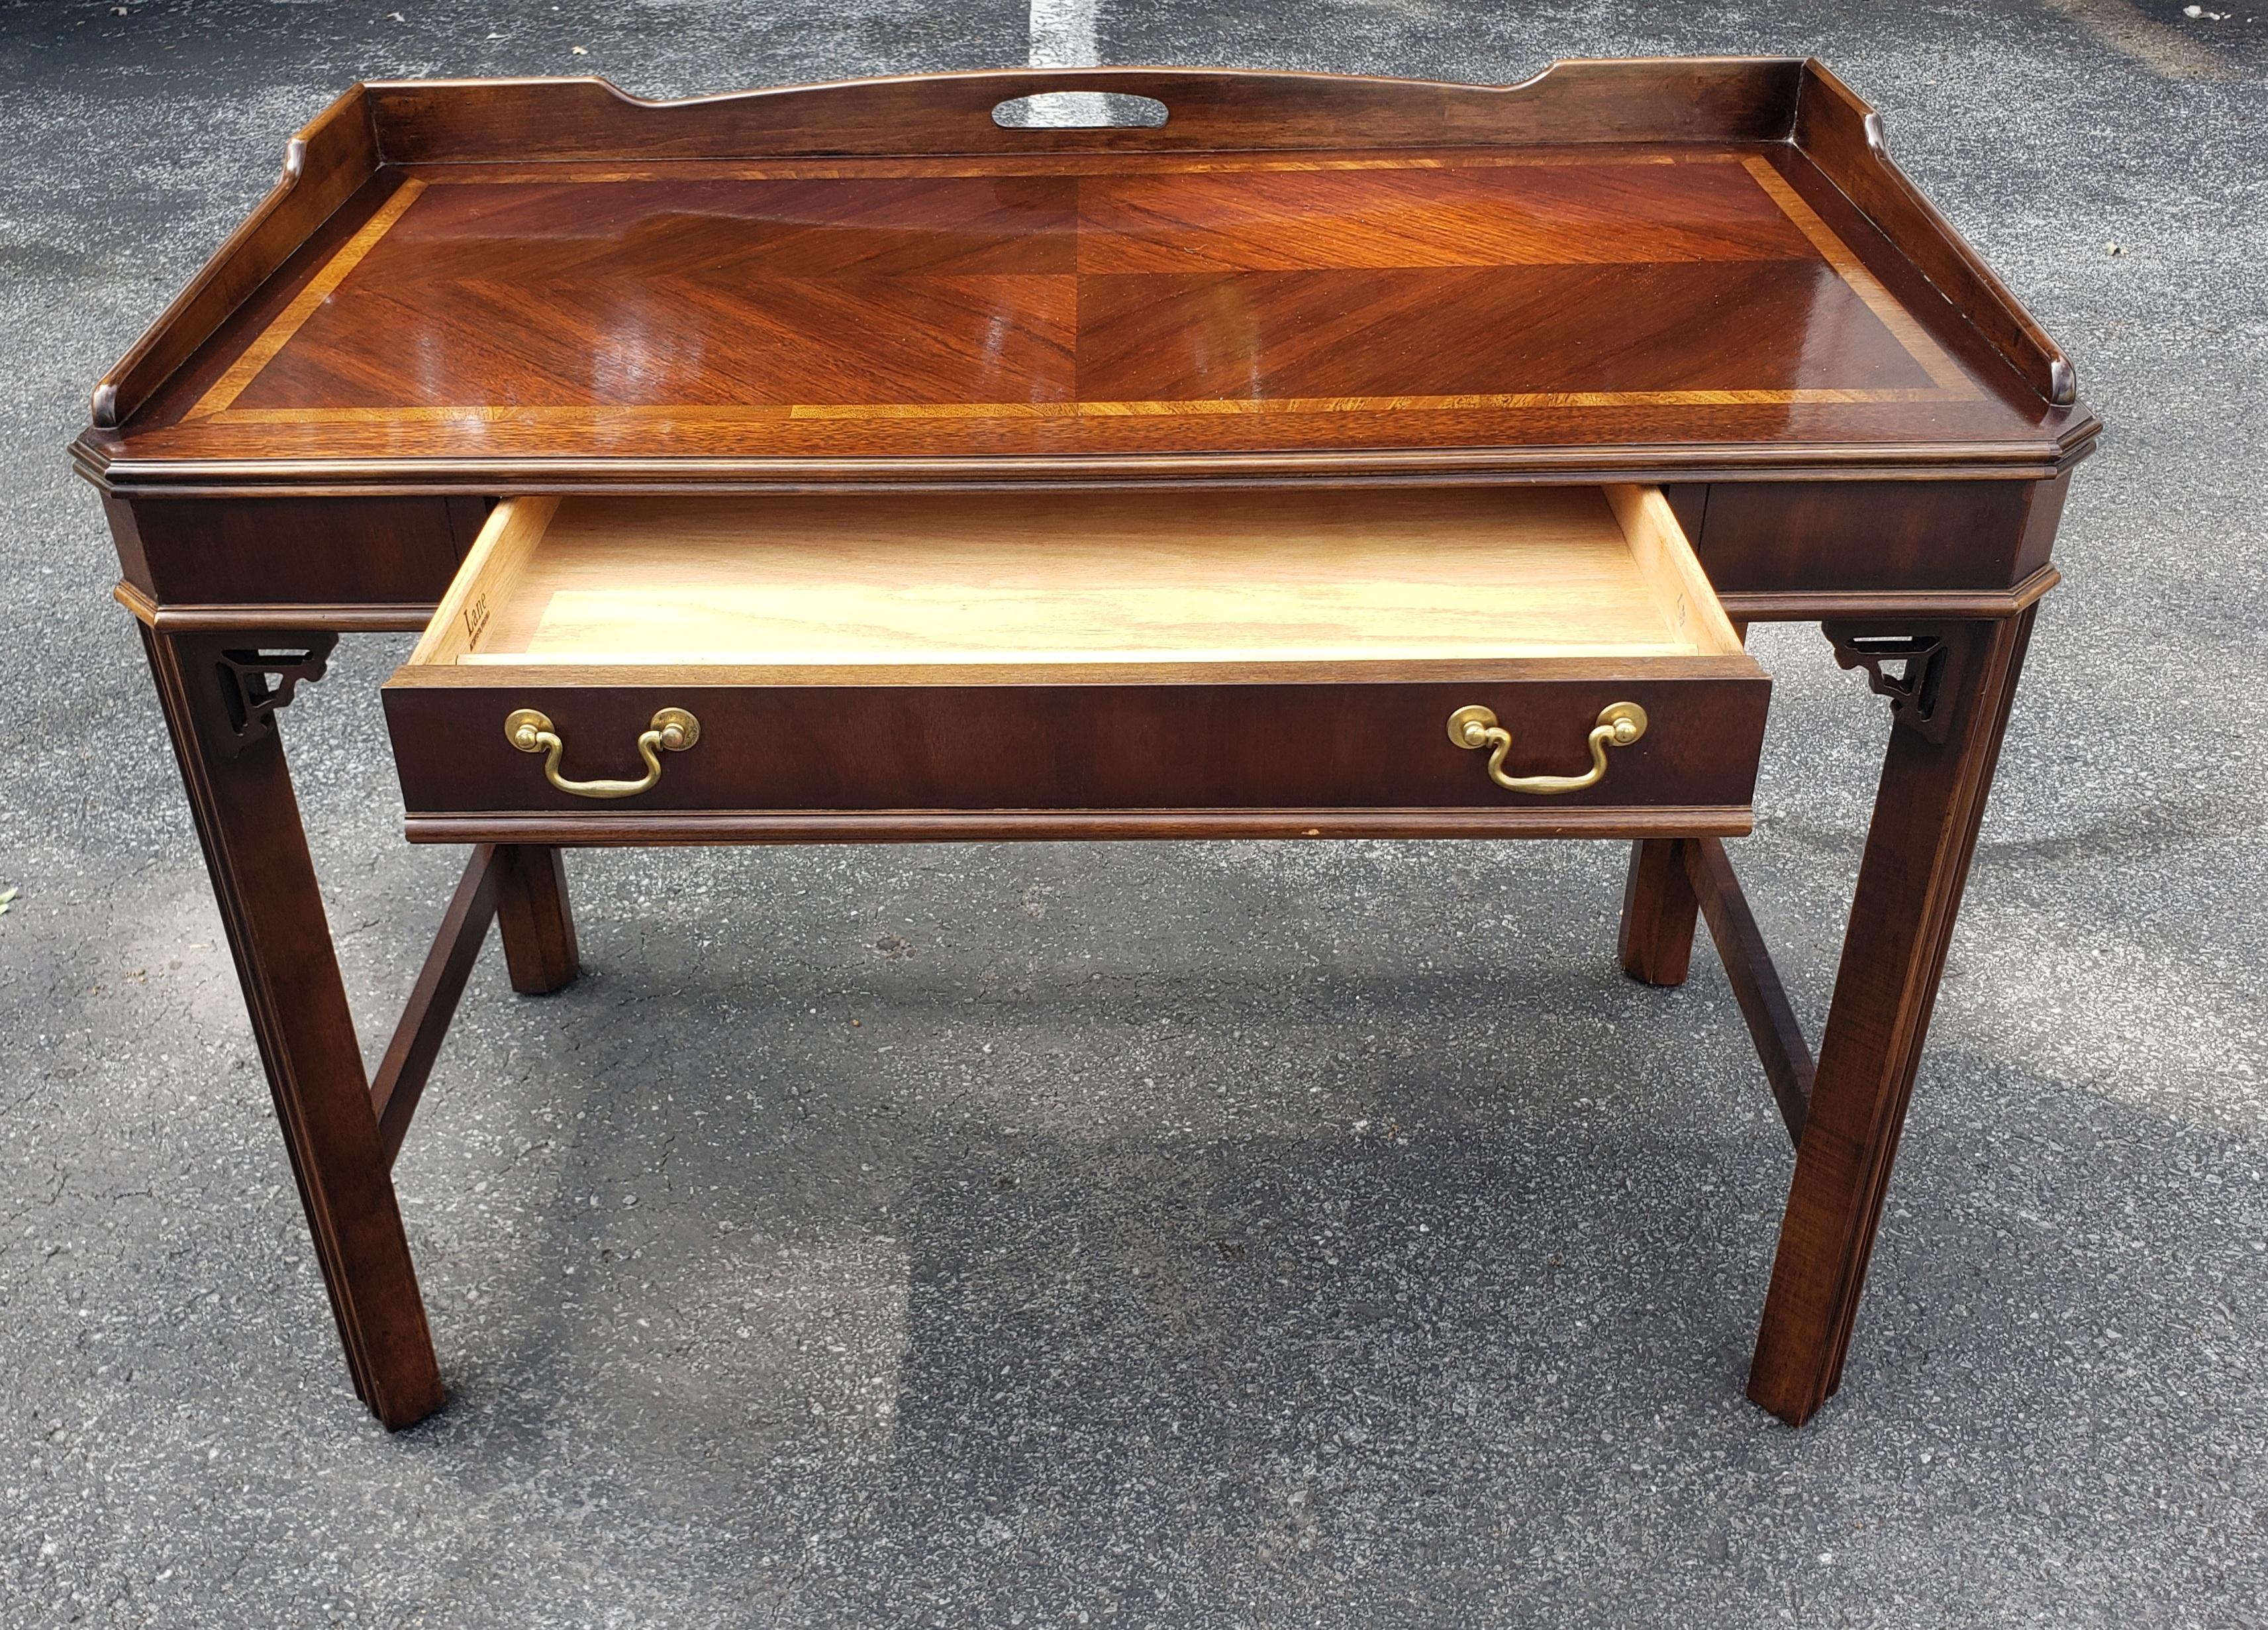 This is a charming little vintage Lane Furniture Chinese Chippendale, Mahogany wood writing desk. This features a beautiful banded inlaid center piping and a stretcher base, with brass handles on either side. It has a center drawer and fretwork